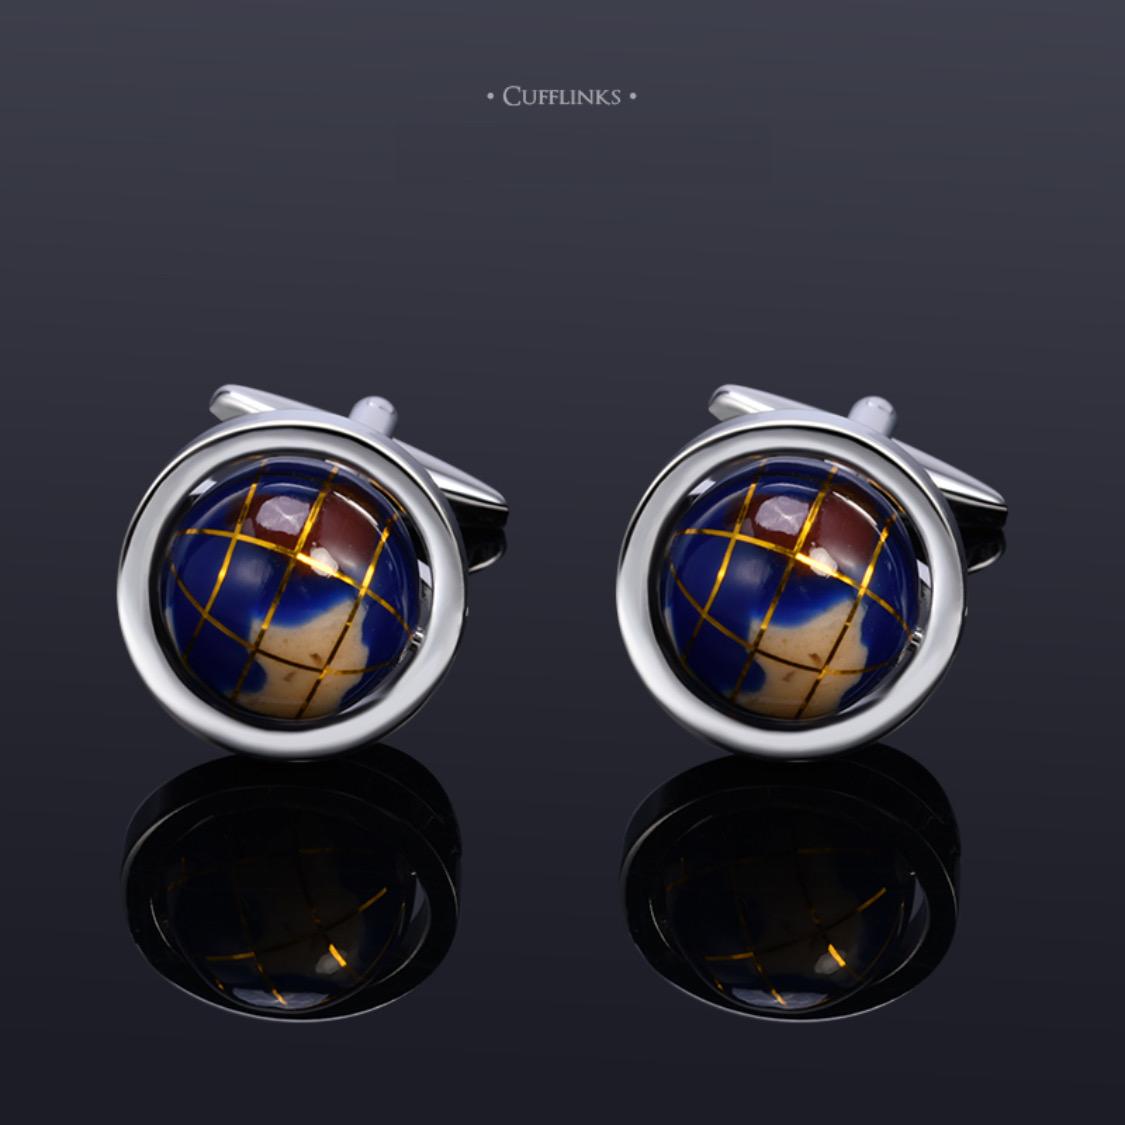 Buy Stylish Cufflinks for Men's Shirts - Elevate Your Look | LABLACK